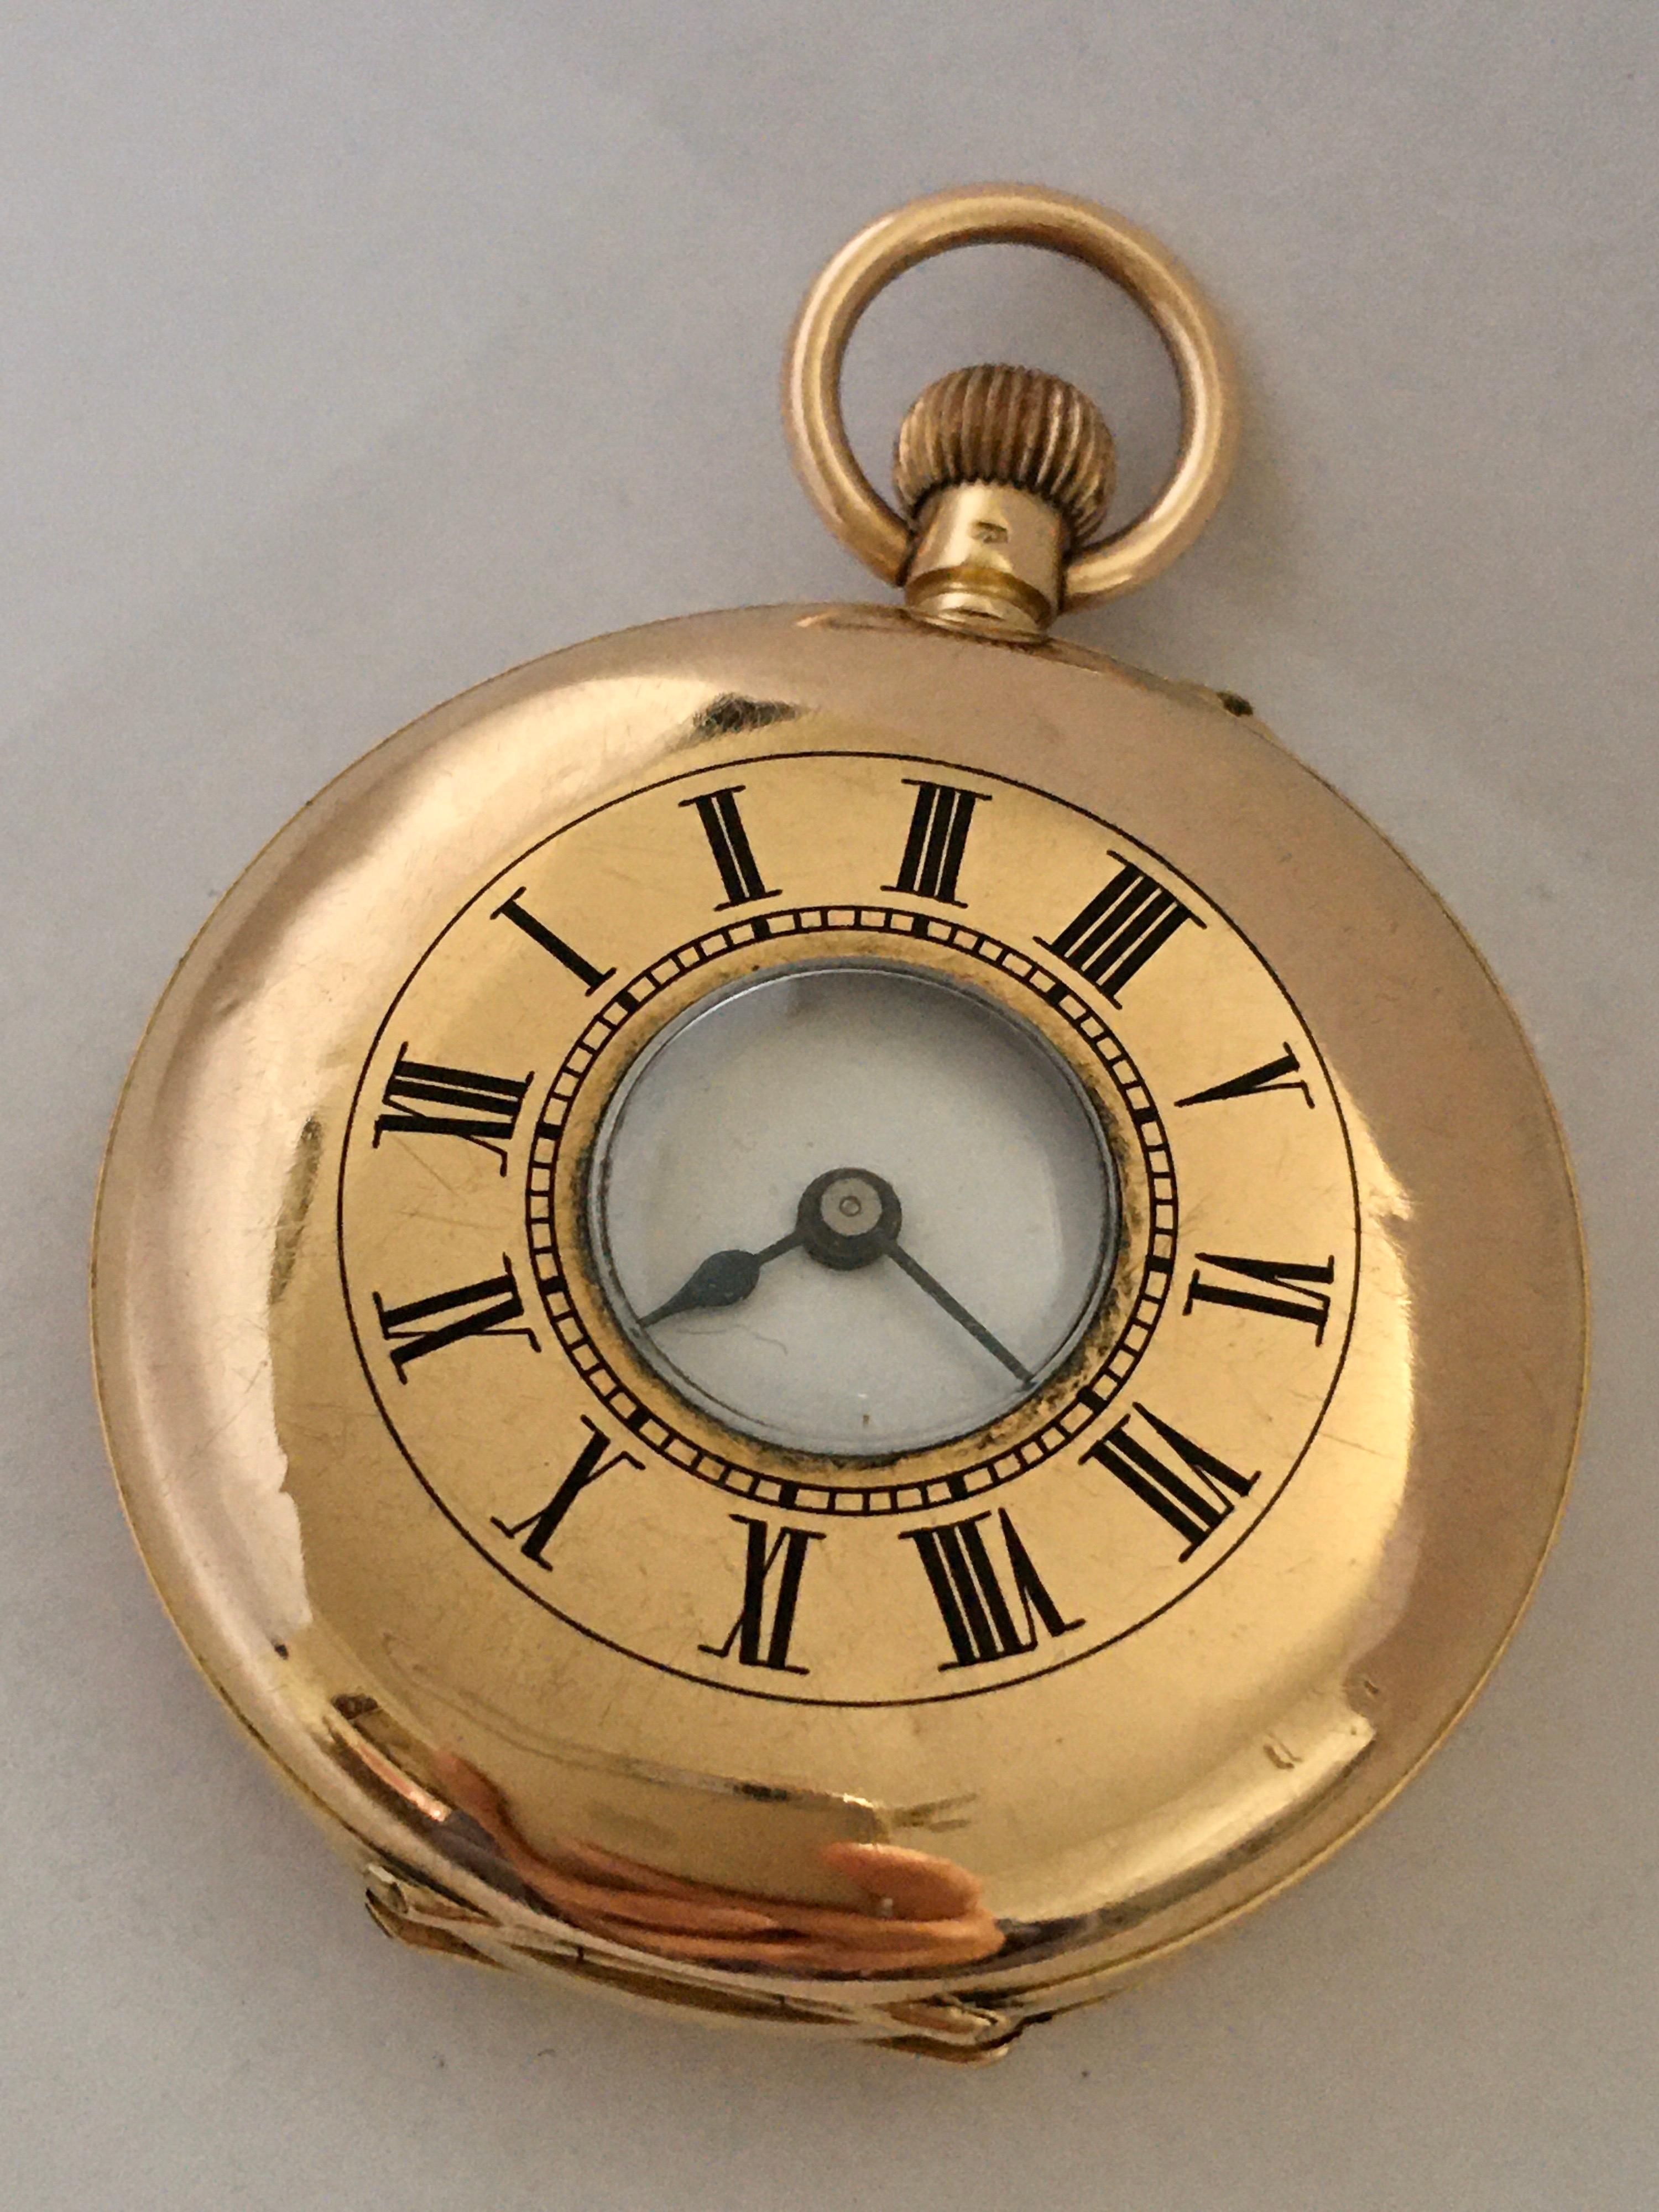 Antique 18k Gold Half Hunter Hand-winding Pocket Watch Signed Harris & Co.


This 40mm diameter watch is in good working condition and it is running well. Visible tiny dents on the gold watch case. This watch weighed 46.9 grams